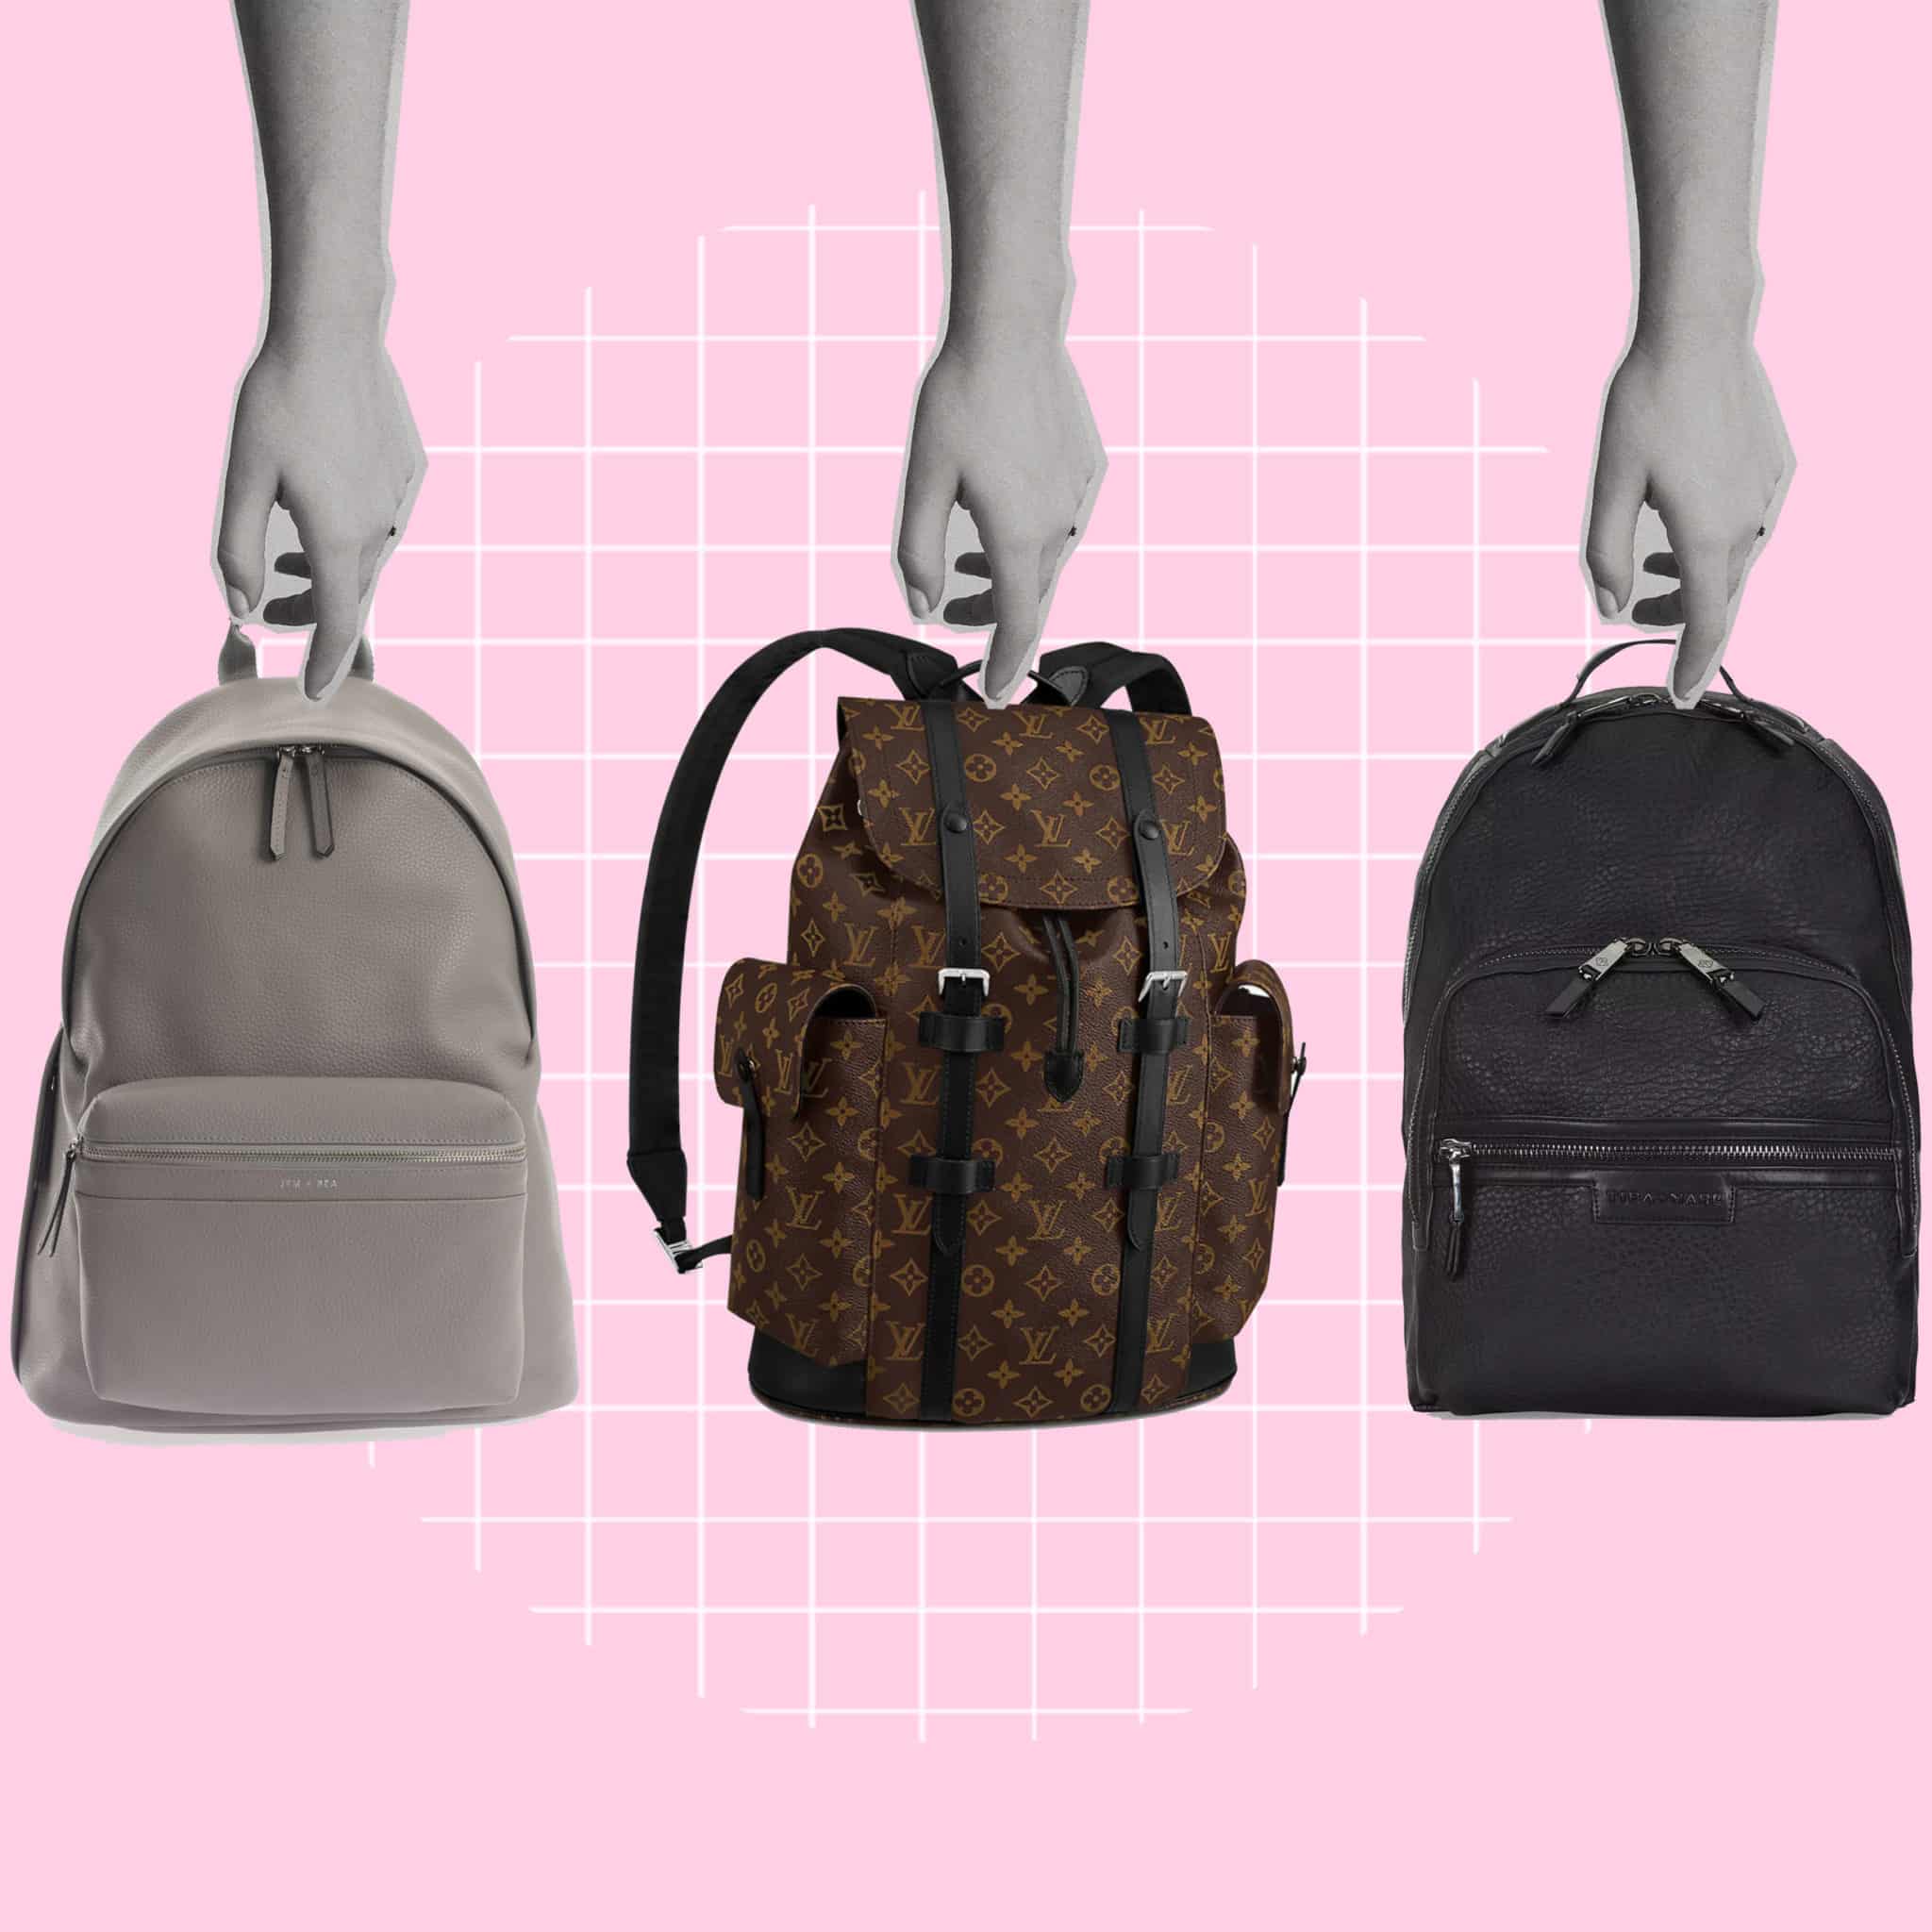 Baby Back Packs You’ll Want To Be Seen Holding